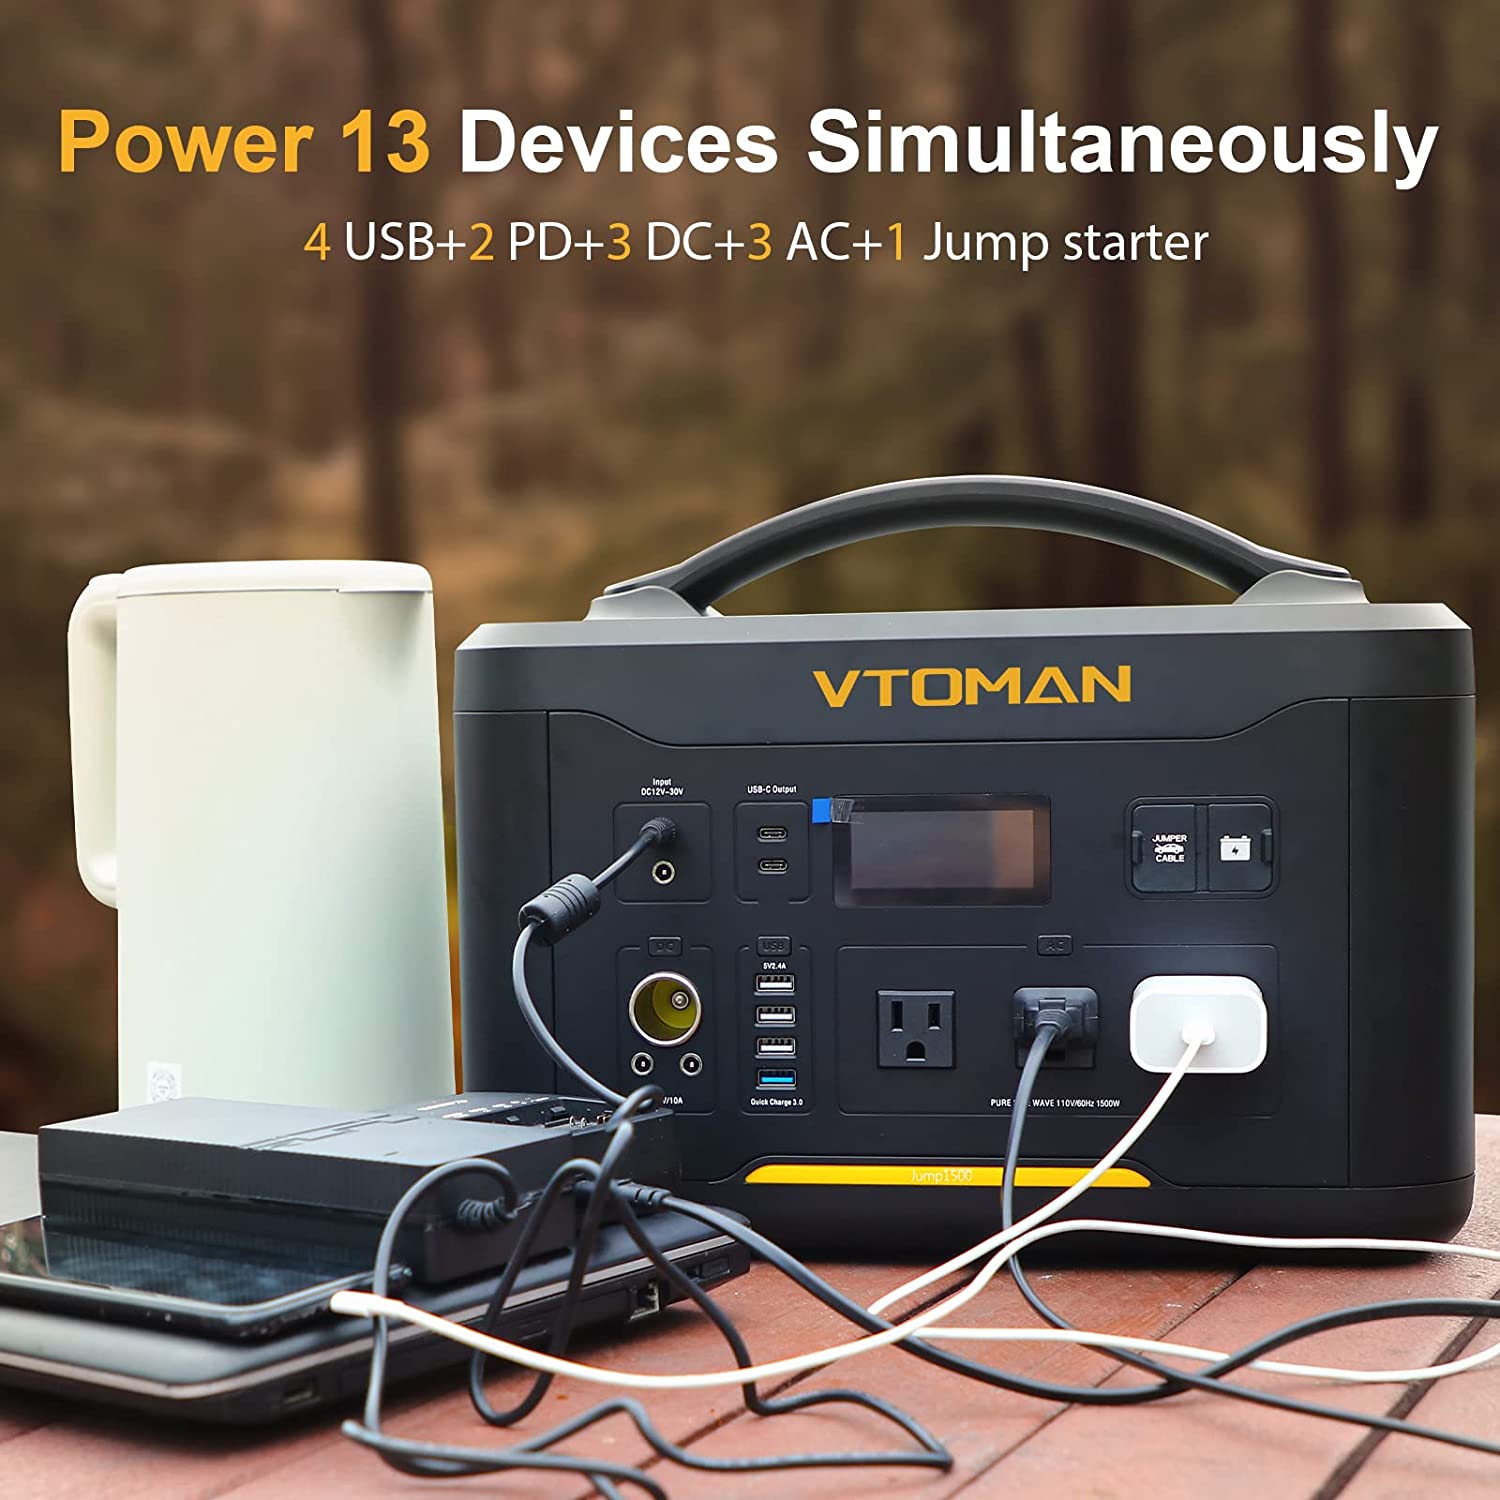 VTOMAN JUMP1500 1500W/1548Wh Portable Power Station Solar Generator with Jump Starter New